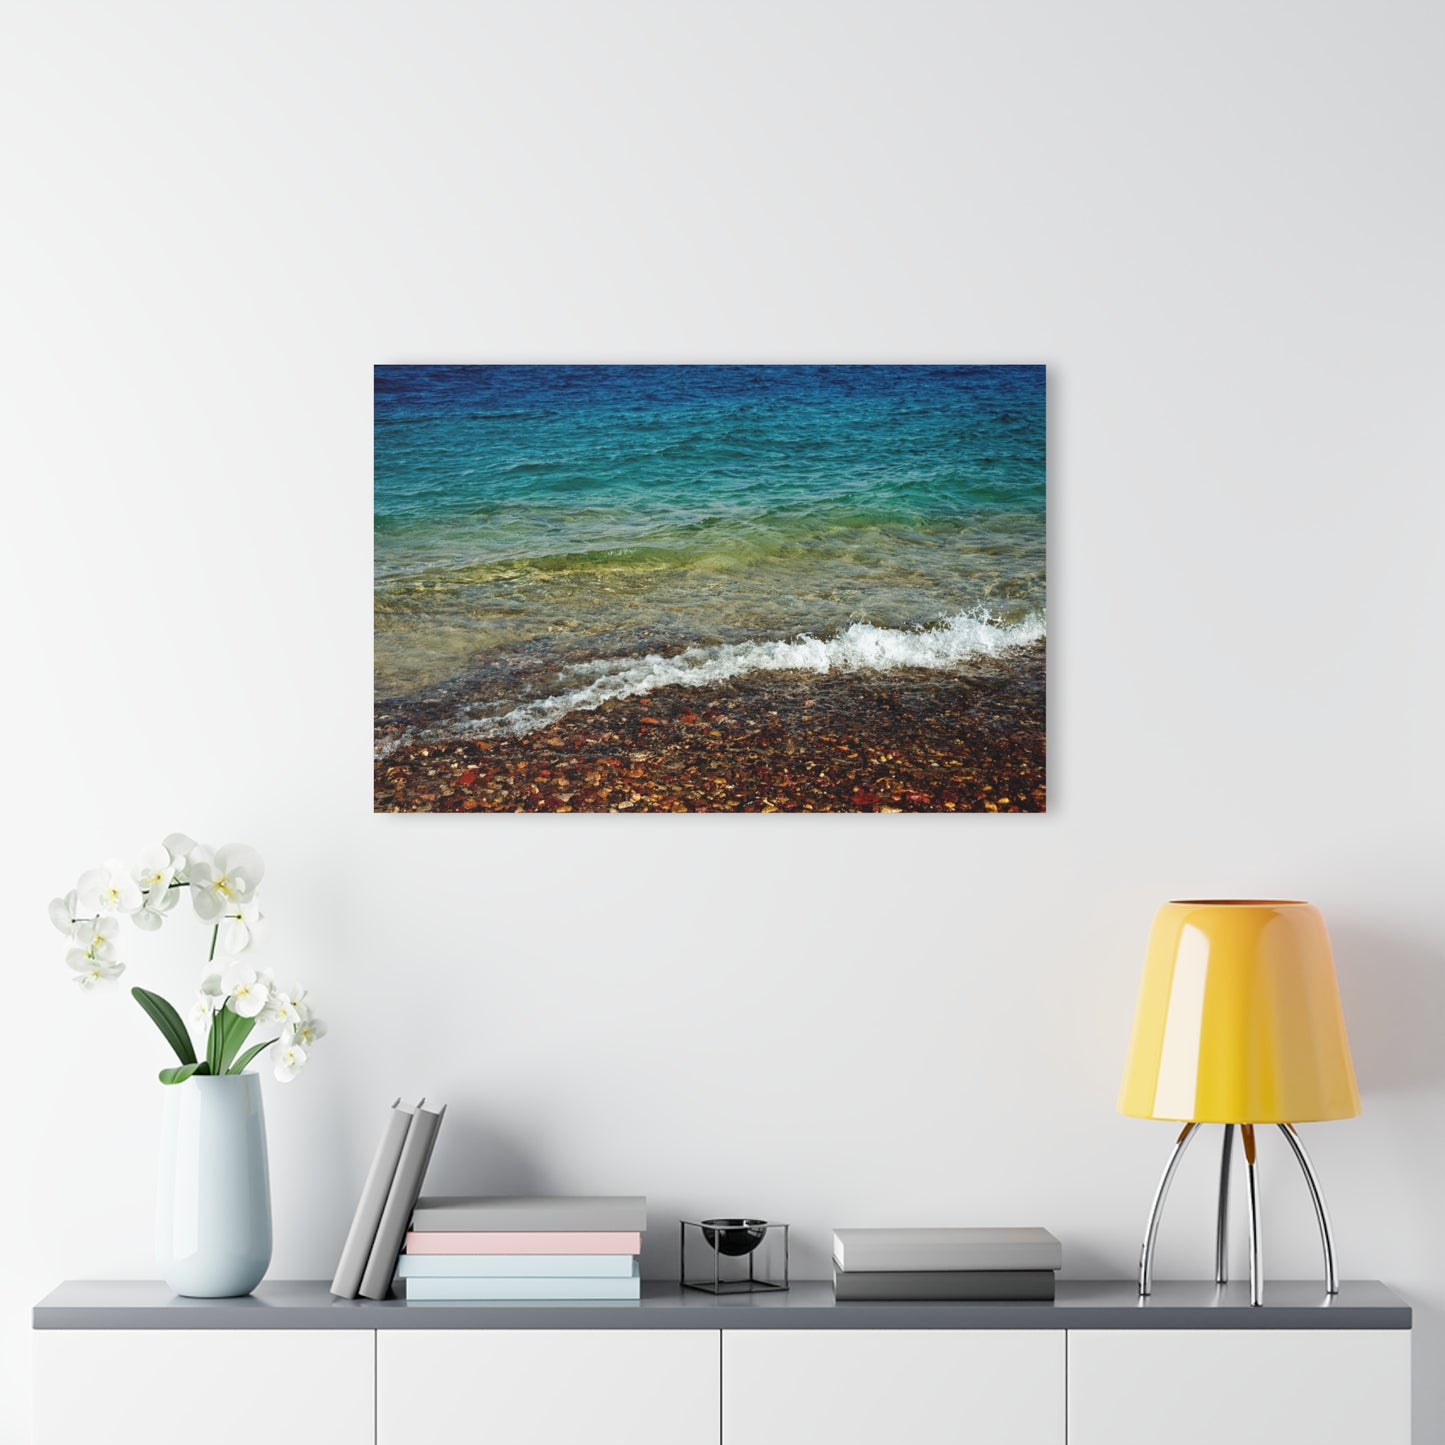 Red Sea Rainbow by Yehoshua Halevi Photograph - Acrylic Print (French Cleat Hanging)